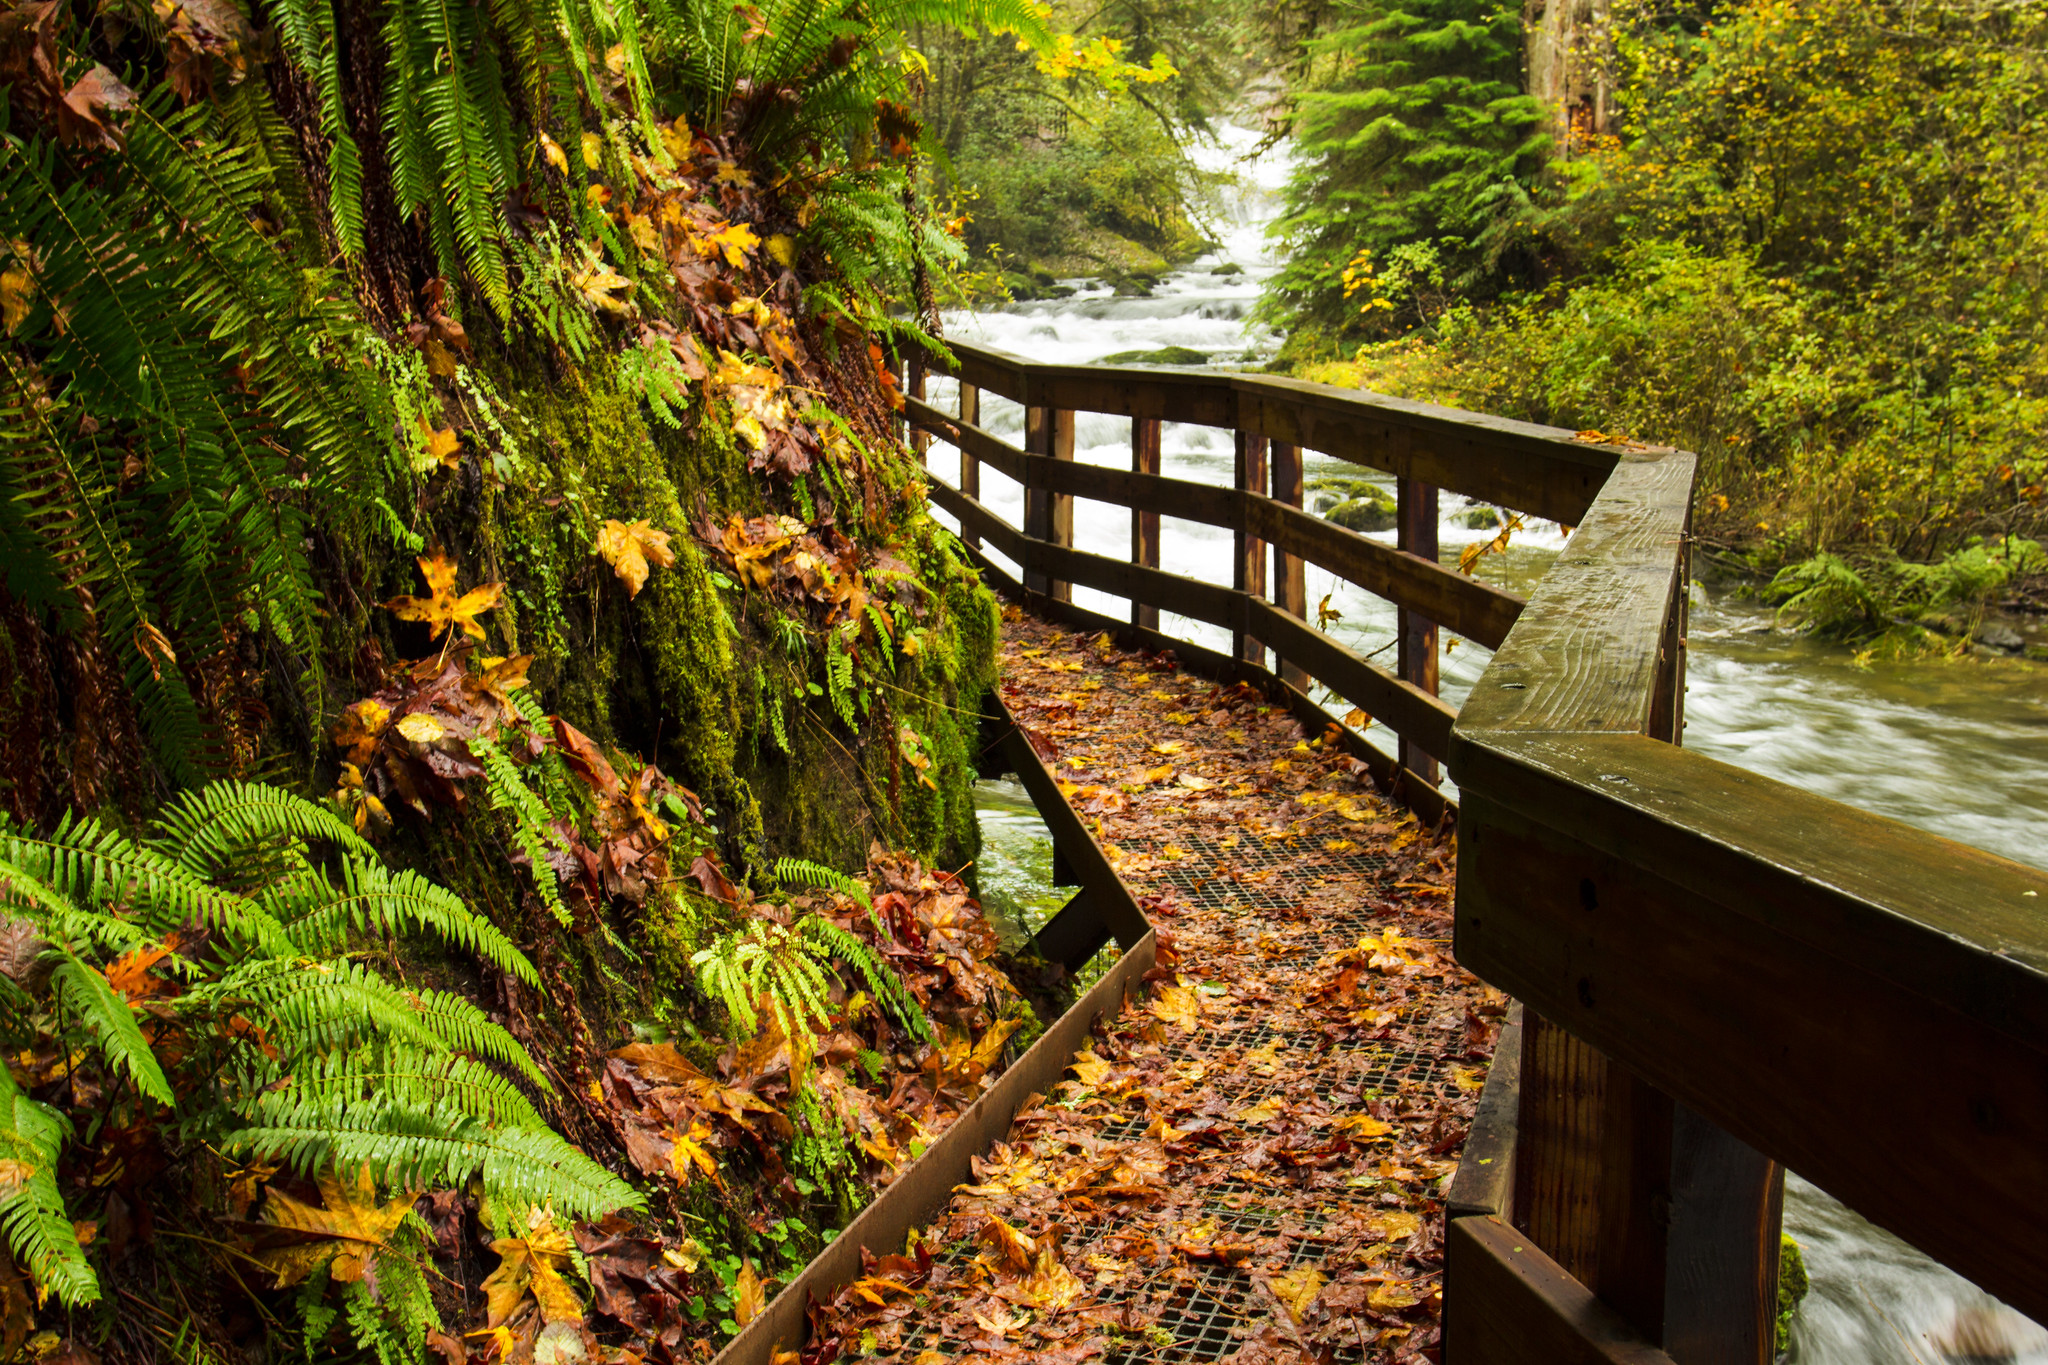 Oregon’s Scenic Trails Face Uncertain Future Due to Legal Grey Area and Liability Concerns